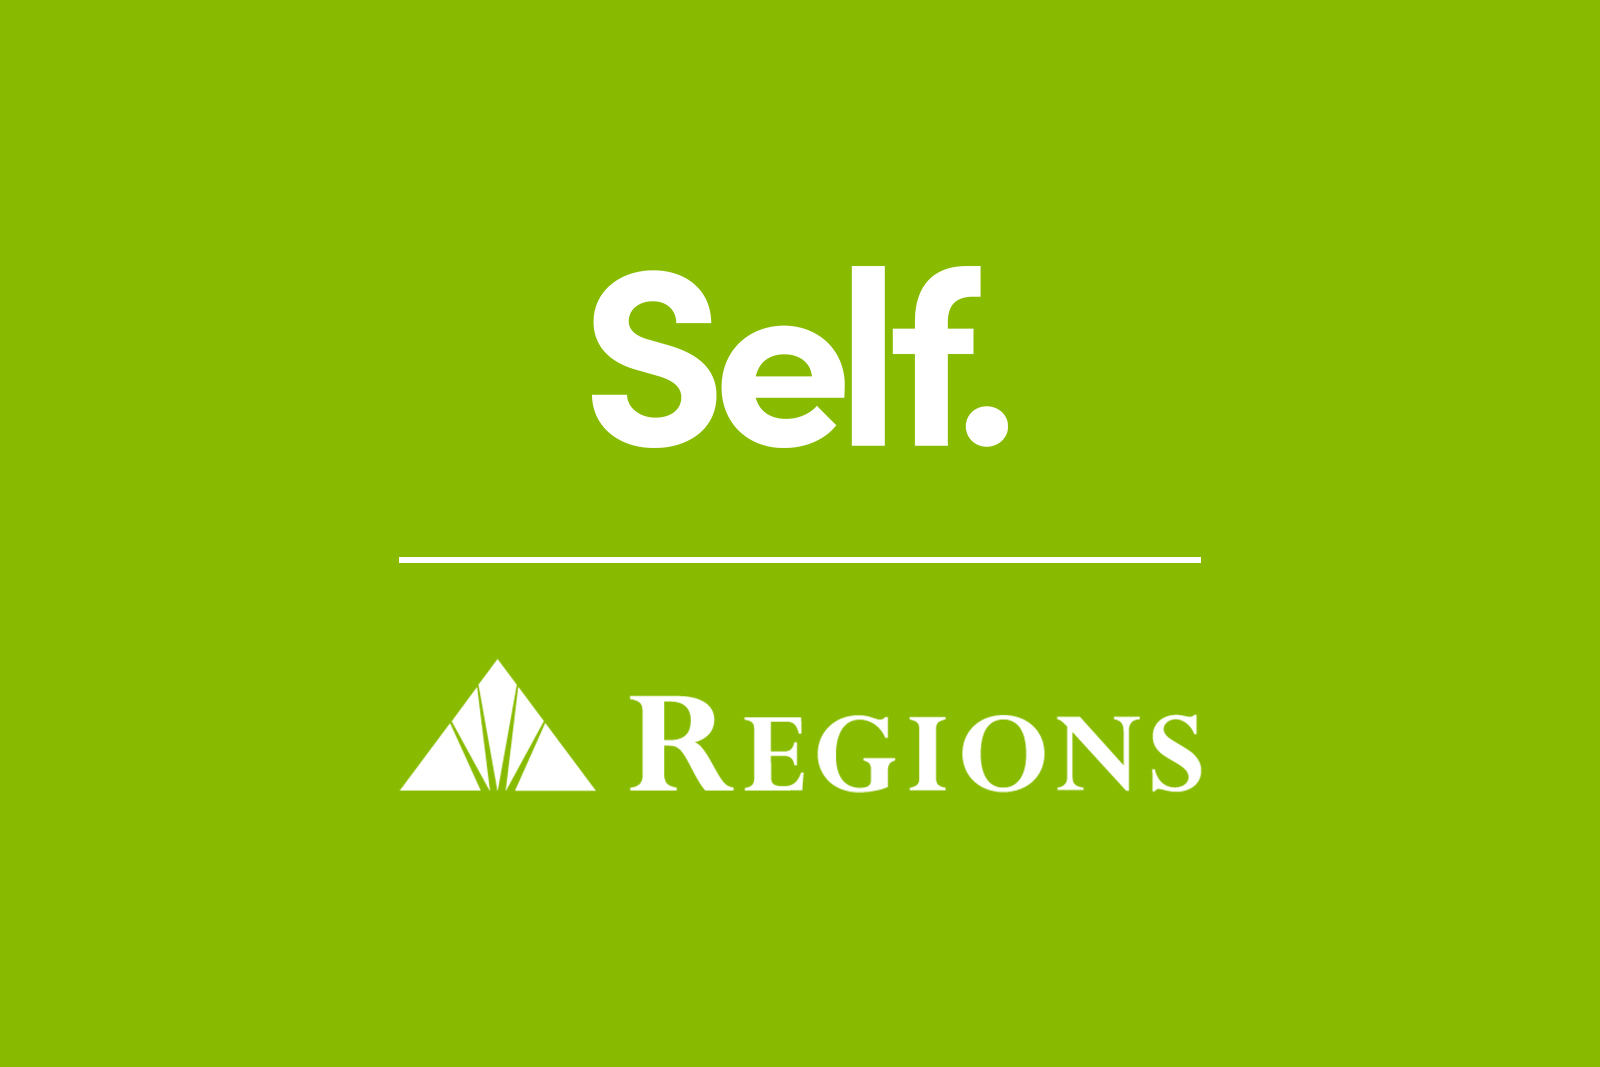 Self Financial and Regions logos on green background